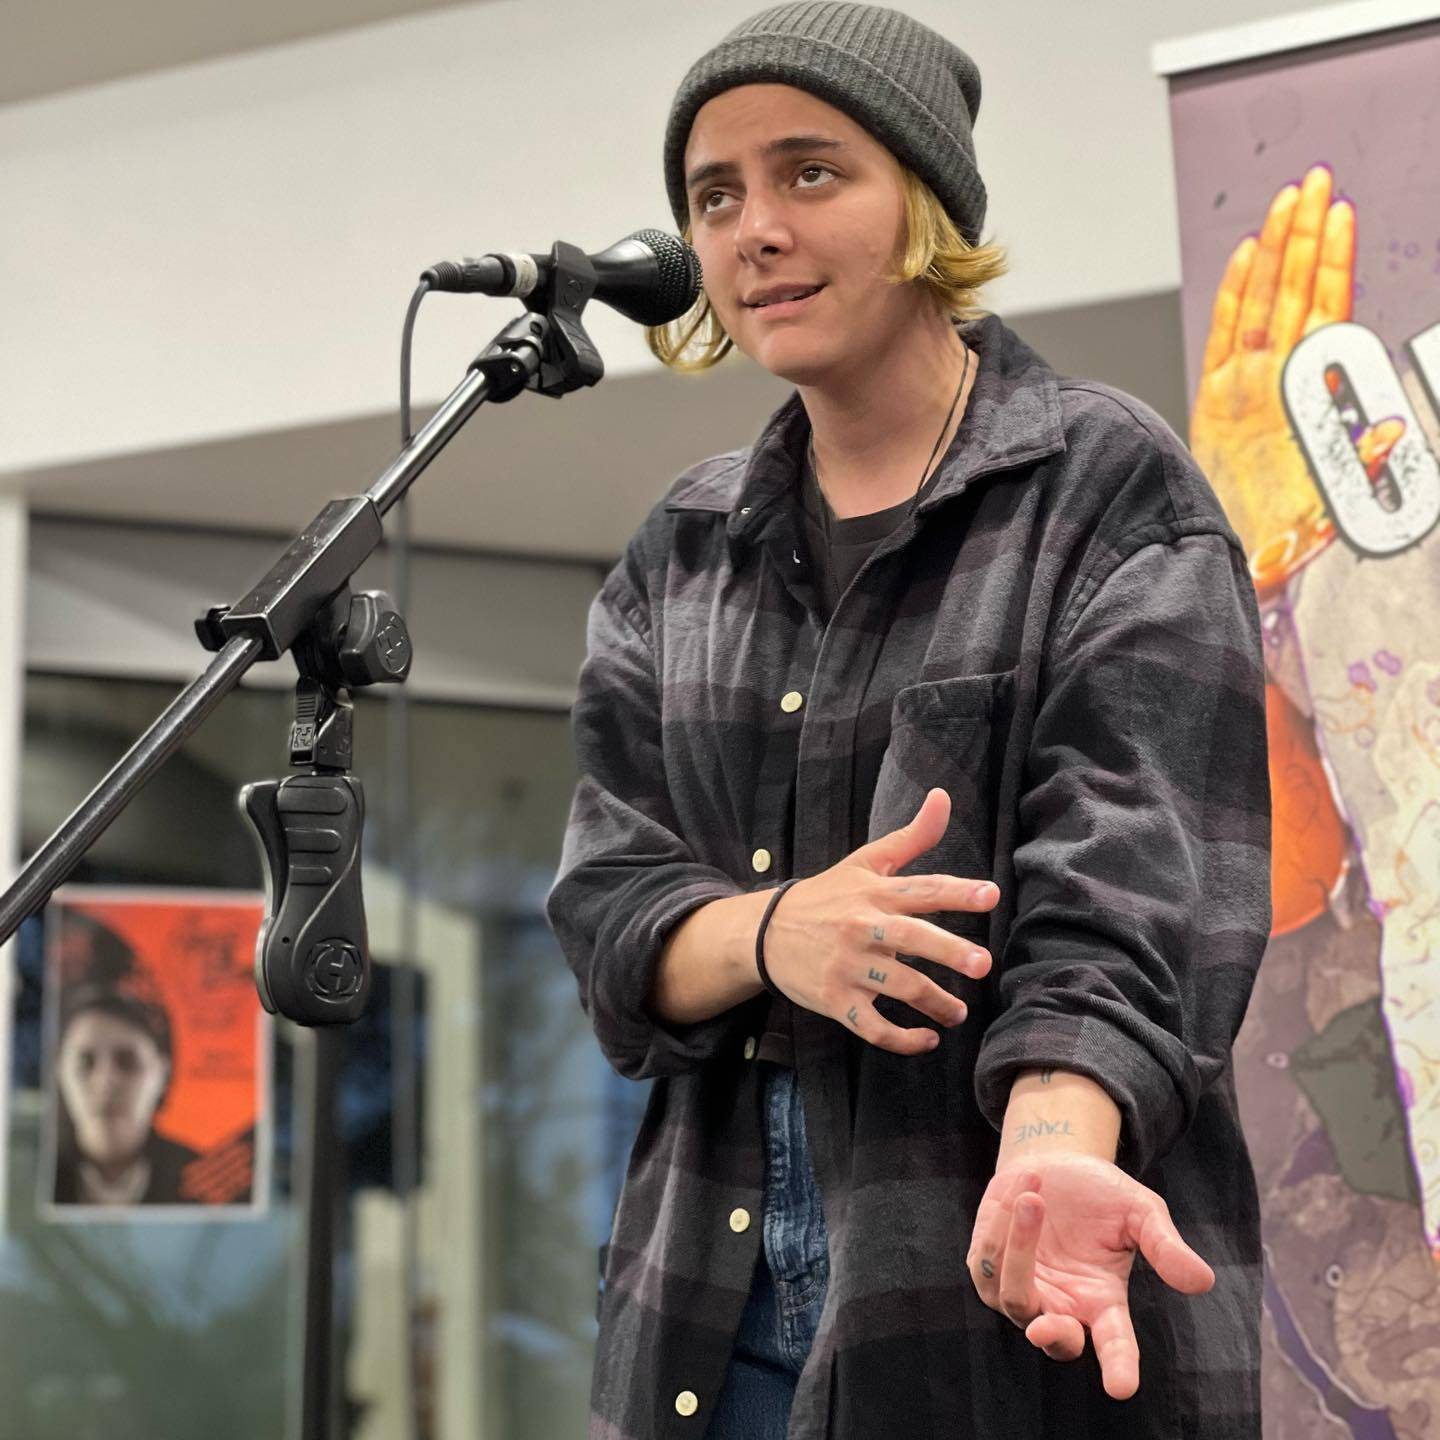 <p><strong>Spoken Word Workshop for Rangatahi</strong></p>

<p>Members Lounge, Level 2</p>

<p>11am&ndash;12:30pm</p>

<p>Piri atu ki te toa toikupu (Poetry Slam), ki a Ngaio Simmons (Ngāti Porou). He kaupapa kore utu. He kaupapa tēnei mā te rangatahi 13-30 te pakeke.&nbsp;E tūpā ana ngā tūranga, nō reira, tāpuia i raro iho nei.&nbsp;</p>

<p>Join Poetry Slam champ Ngaio Simmons (Ngāti Porou) for a free spoken word workshop.</p>

<p>This session is for all rangatahi aged 13&ndash;30. In recognition of Matariki and the transition of seasons, this workshop will focus on te taiao and our place in an ever-changing natural world. We&rsquo;ll be tapping into the power of writing as a medium through which we can express ourselves, specifically focusing on the art of spoken word poetry. This workshop will be a space for us to think, reflect and write our ever-changing stories.</p>

<p>Spaces are limited, please book via this <a href="https://www.aucklandartgallery.com/whats-on/event/spoken-word-workshop">link</a>.</p>

<p>Photo credit: Action Education</p>
